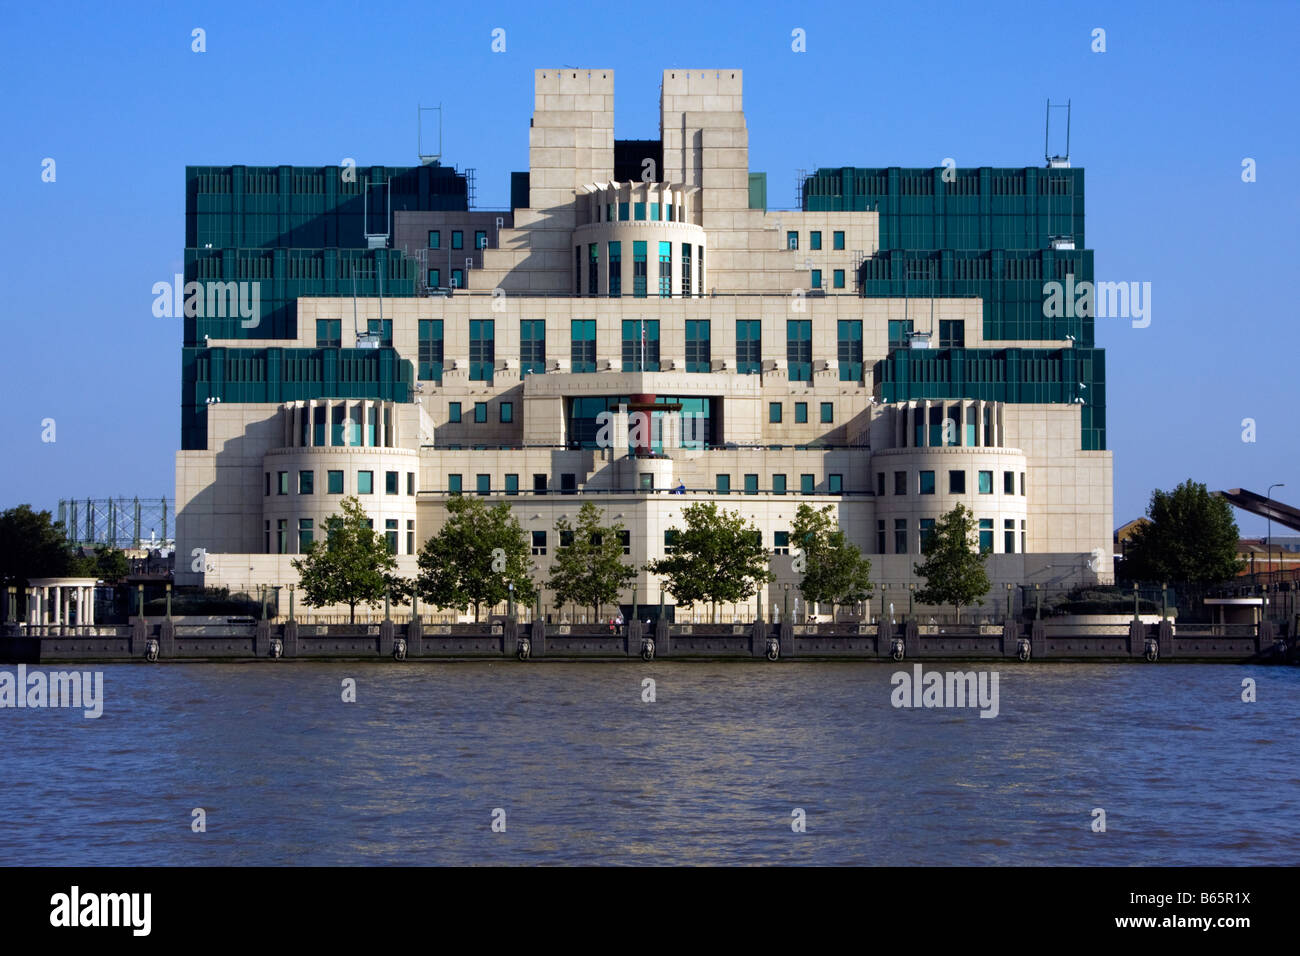 Secret Intelligence Service (MI6 or SIS) headquarters Building at Vauxhall in London, England on the River Thames Stock Photo